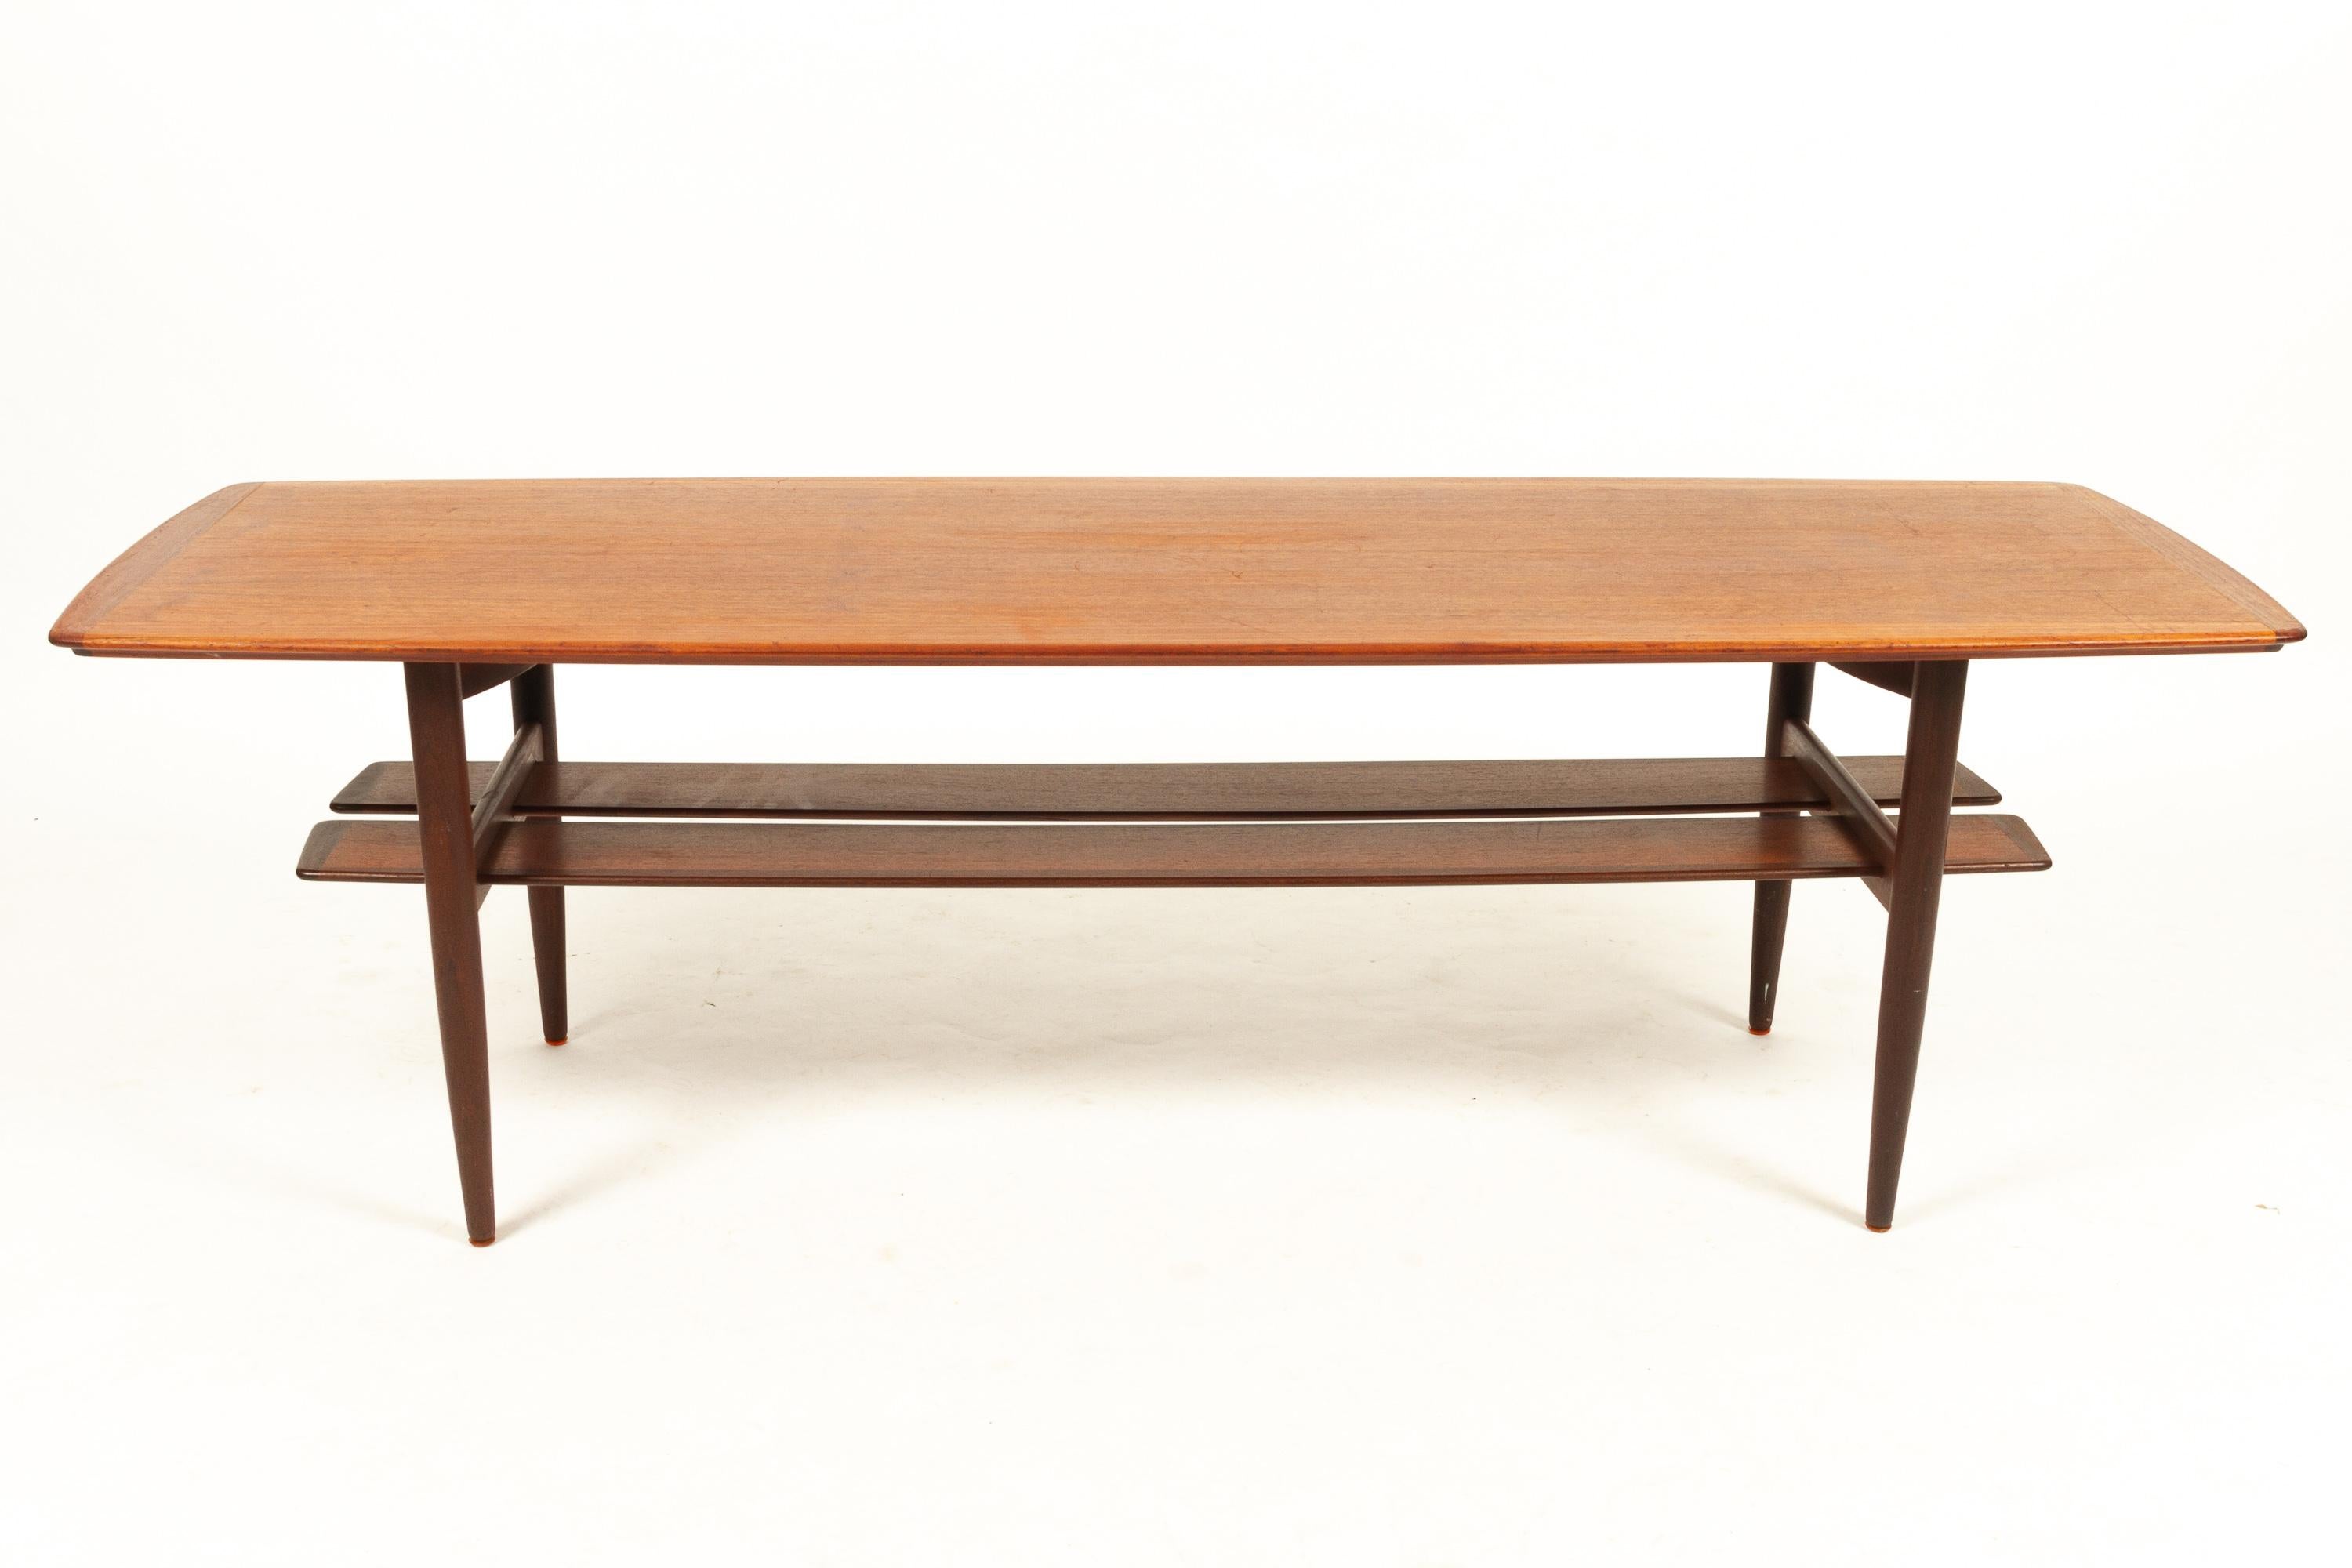 Danish teak coffee table by H. W. Klein for Bramin 1960s.
Designed in 1962. Beautiful Mid-Century Modern boat/surfboard shaped coffee table with split magazine shelf. Top and shelves are framed in solid teak. Lovely teak veneer on top and shelves.